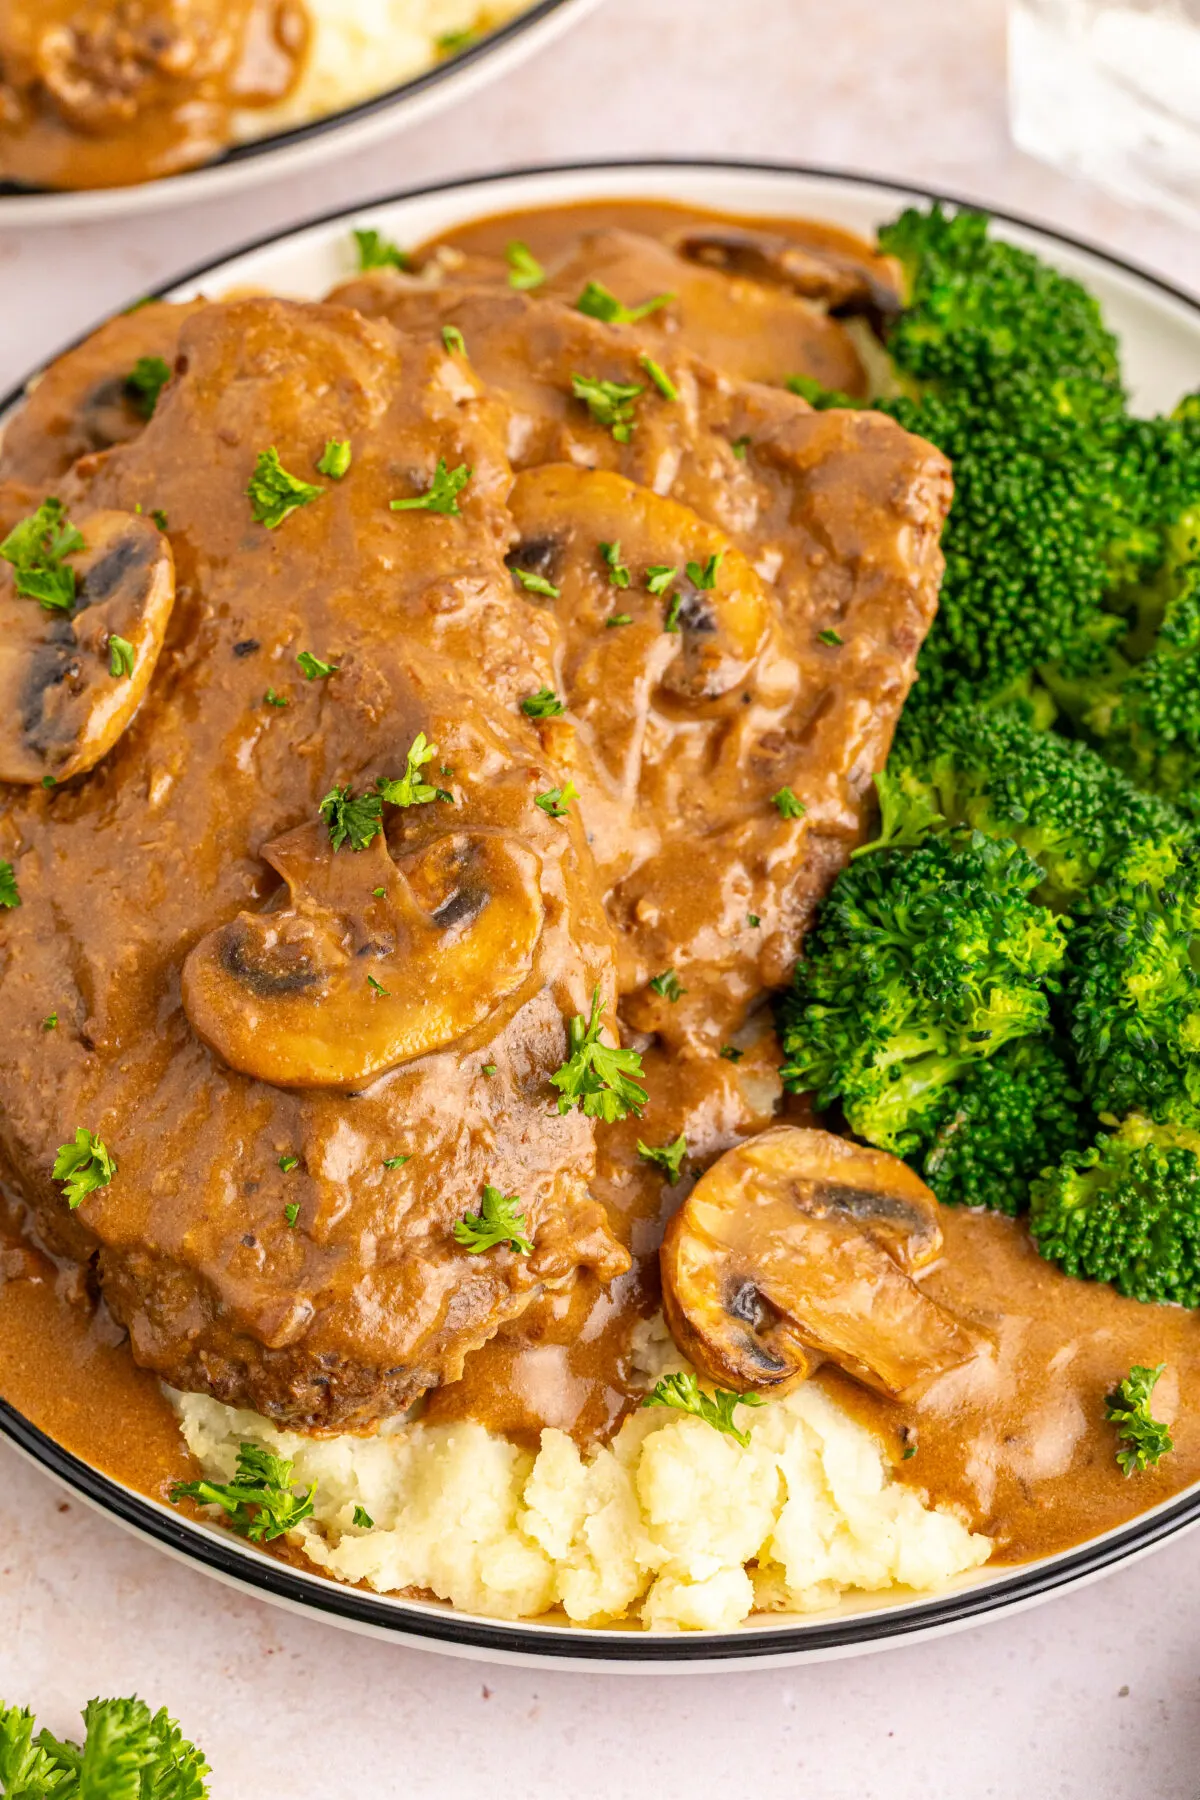 Try this delicious slow cooker cube steak recipe! Tender, juicy meat smothered in savoury gravy and mushrooms - a perfect comfort food dish.